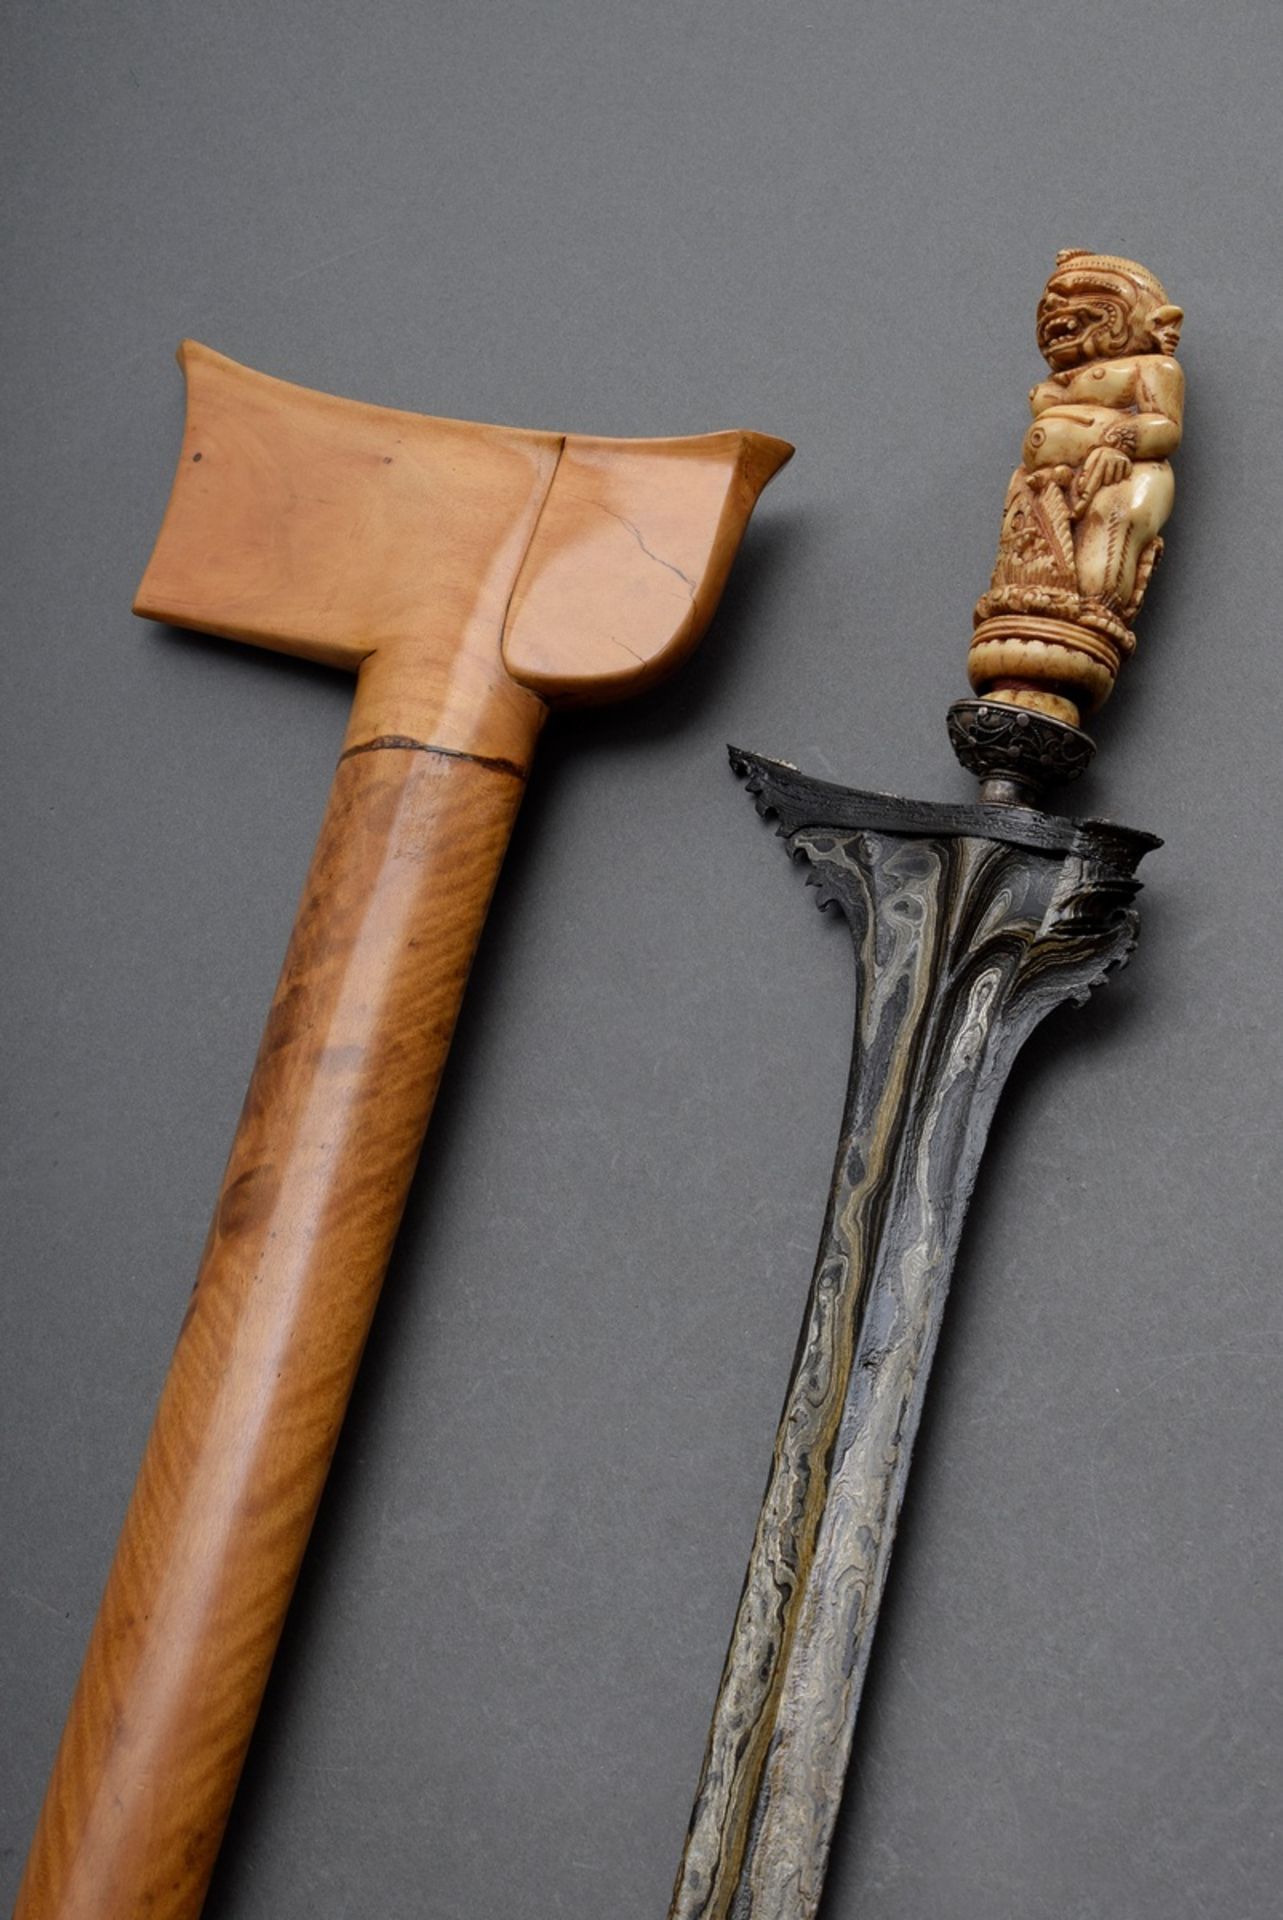 Indonesian kris: Dapur Bener, straight blade with flamed pamor (19th c.), strongly developed janur  - Image 6 of 10